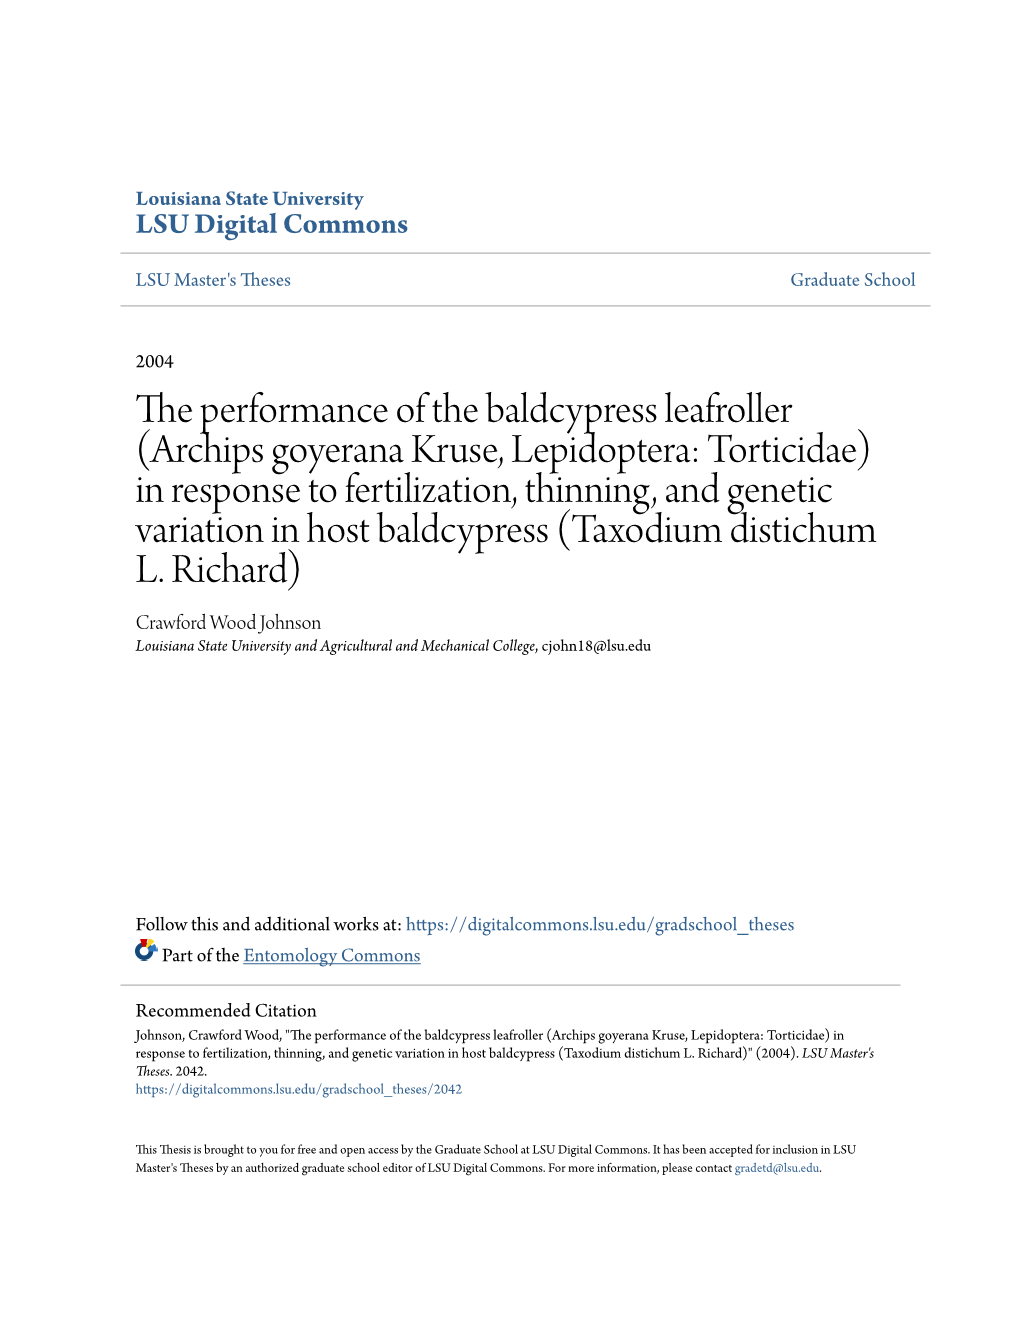 The Performance of the Baldcypress Leafroller (Archips Goyerana Kruse, Lepidoptera: Torticidae) in Response to Fertilization, Th